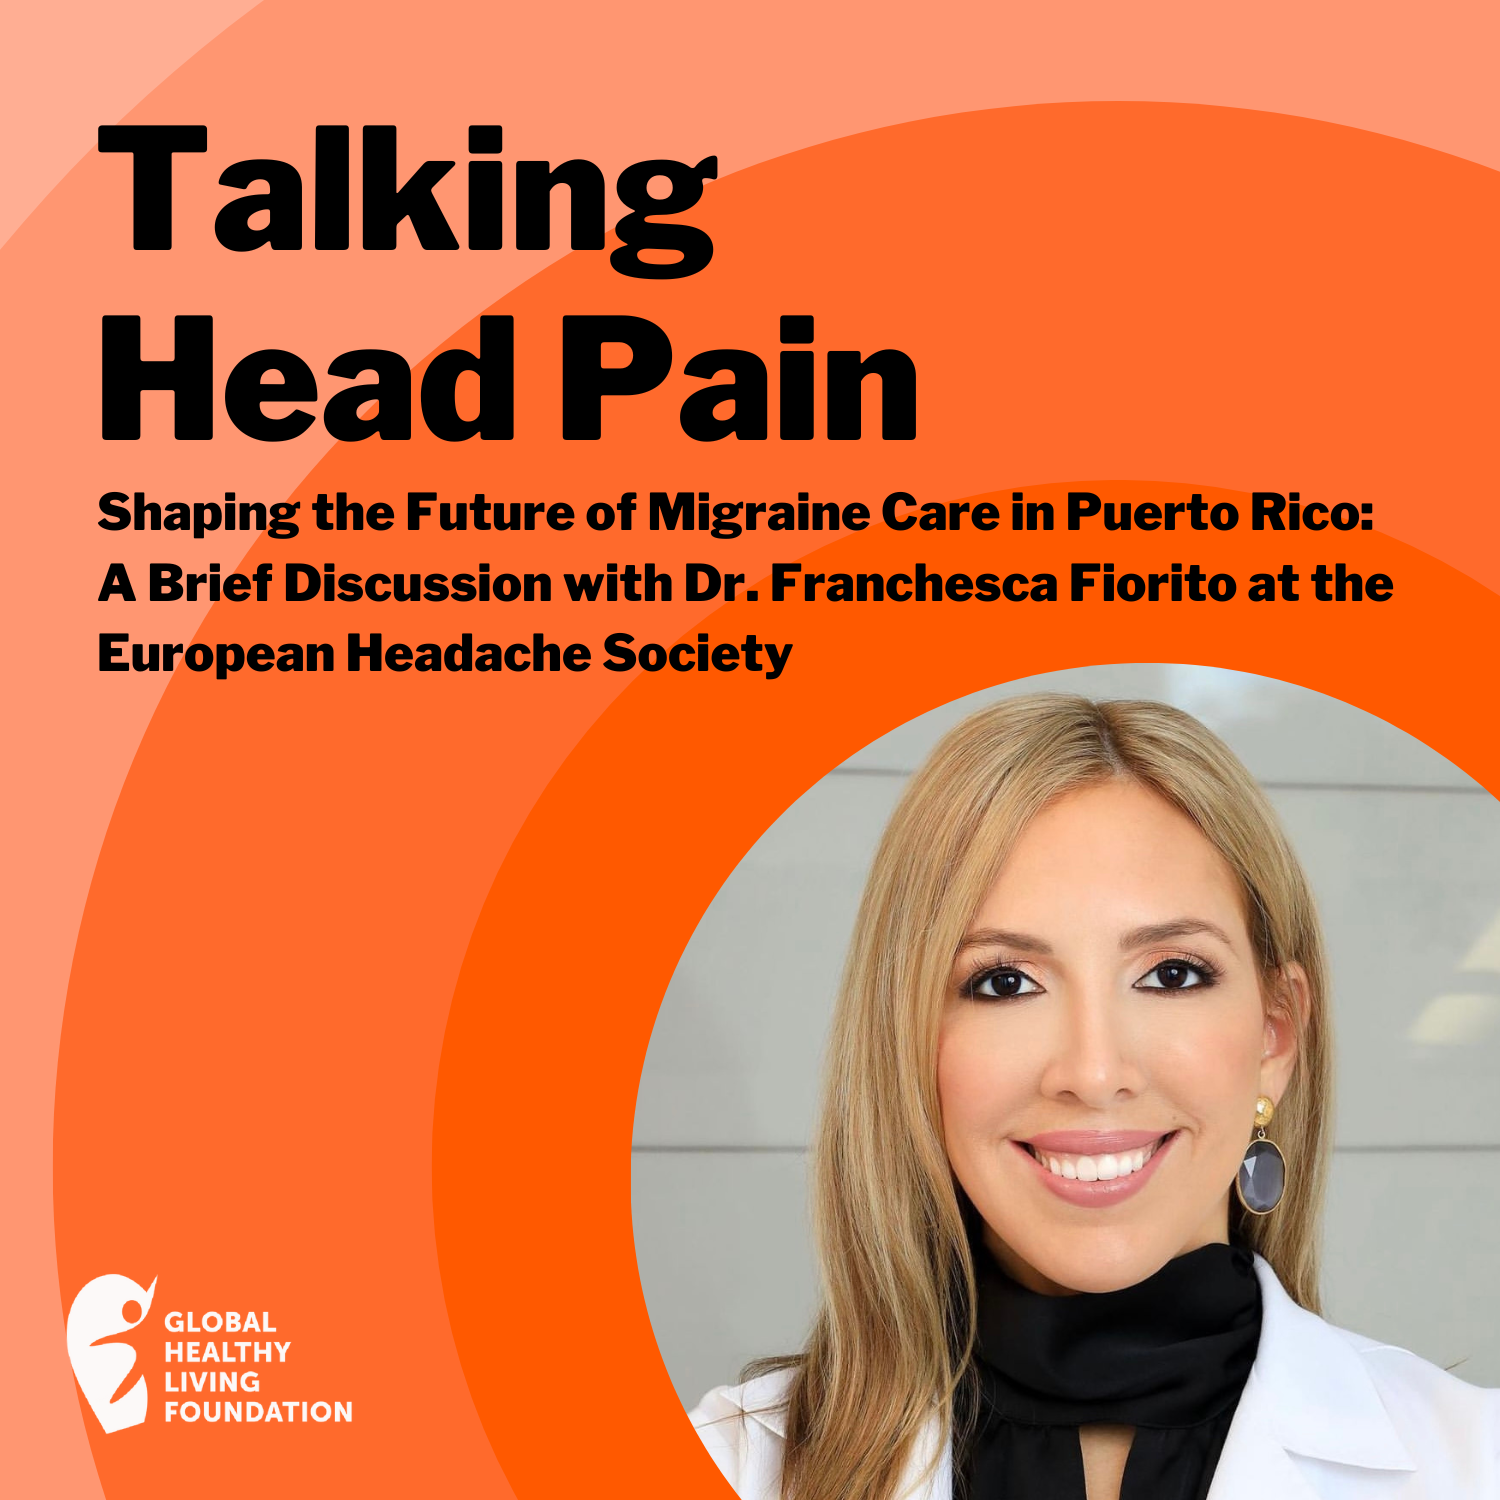 Shaping the Future of Migraine Care in Puerto Rico: A Brief Discussion with Dr. Franchesca Fiorito at the European Headache Society